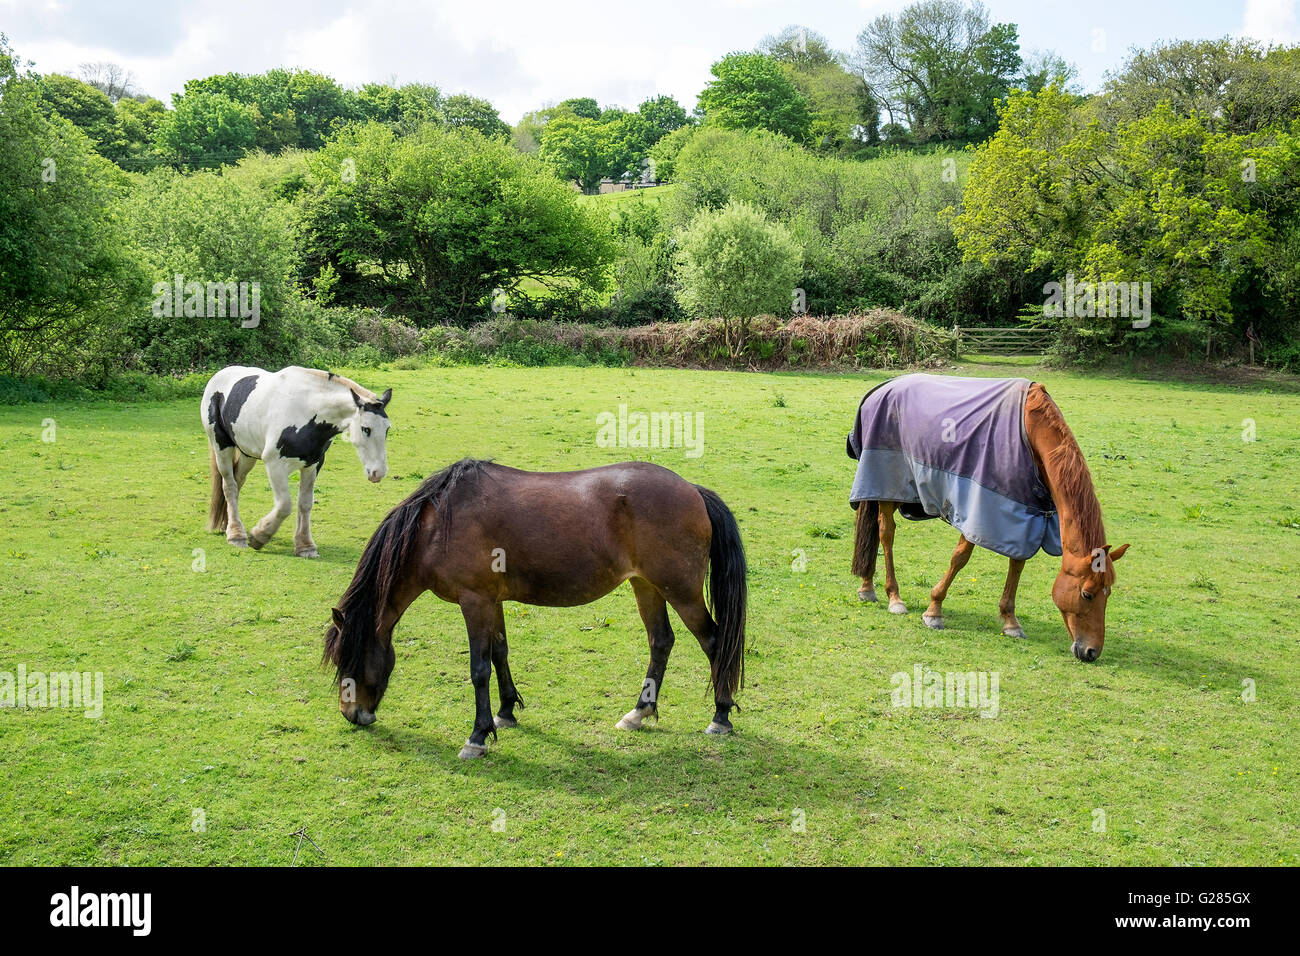 Horses grazing in a field Stock Photo